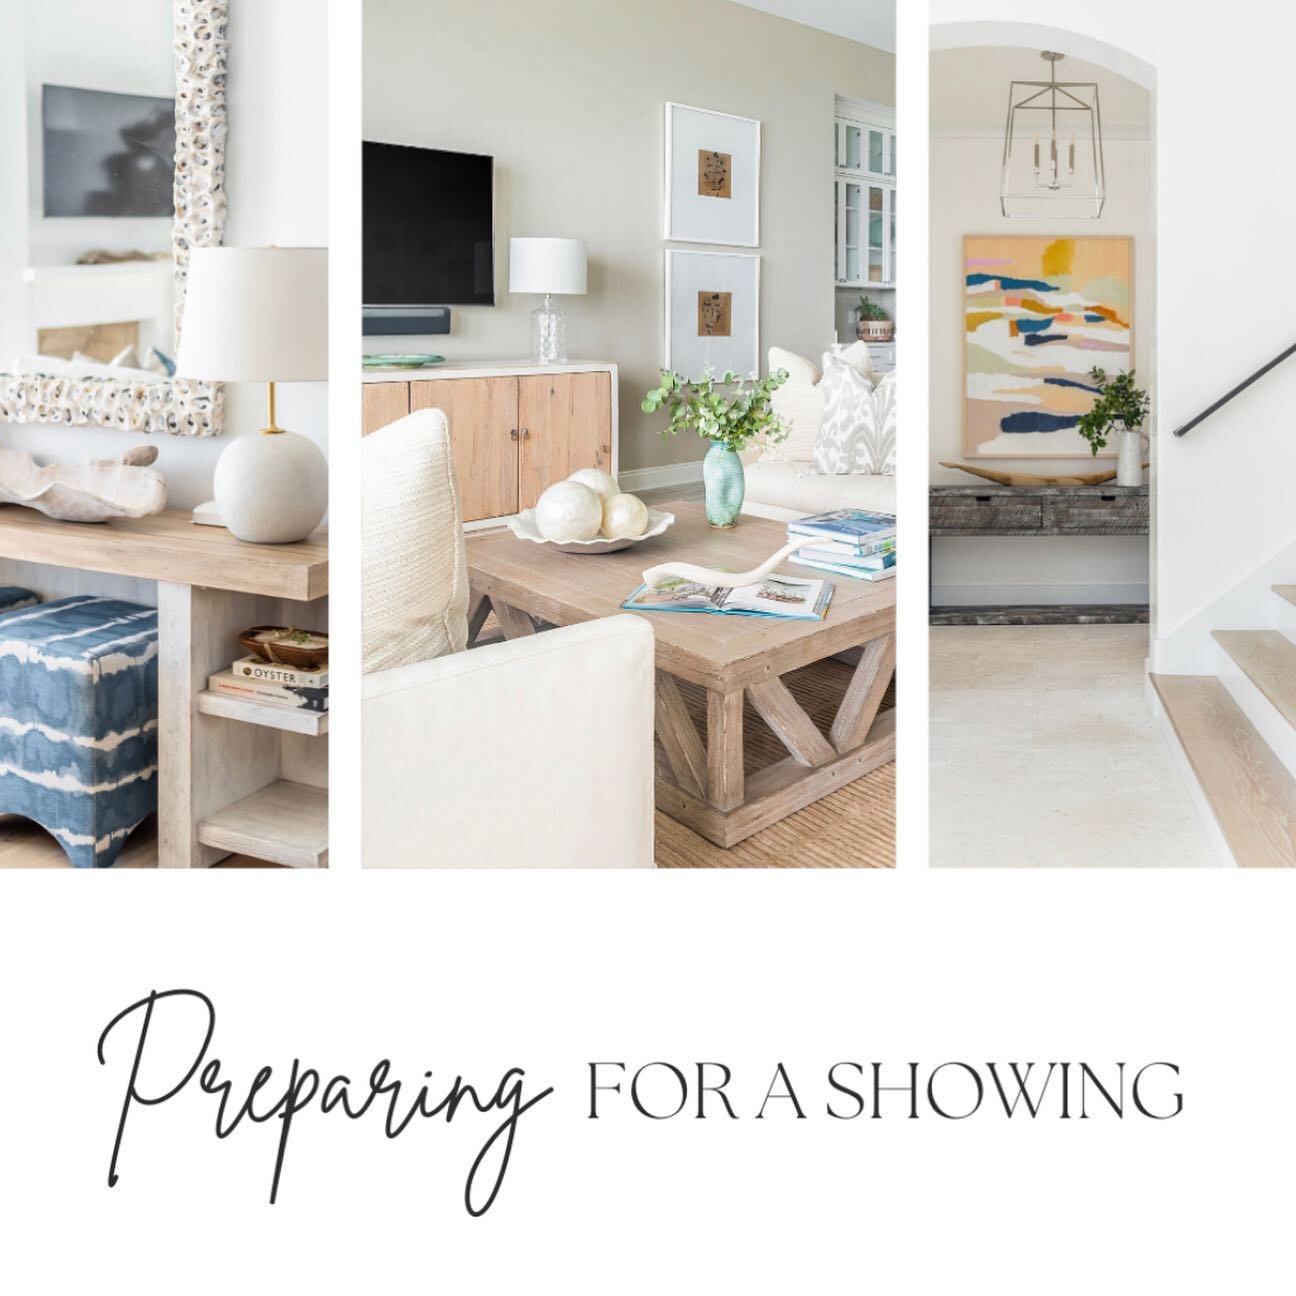 Can I be real for a second?&nbsp;I&rsquo;ve shown A LOT of homes, and can I just say that one of the BEST, BEST, BEST things you can do as a seller is oh-so-simply but incredibly underrated. It's this:

Clean.&nbsp;Yep. Clean. You'd be shocked at the